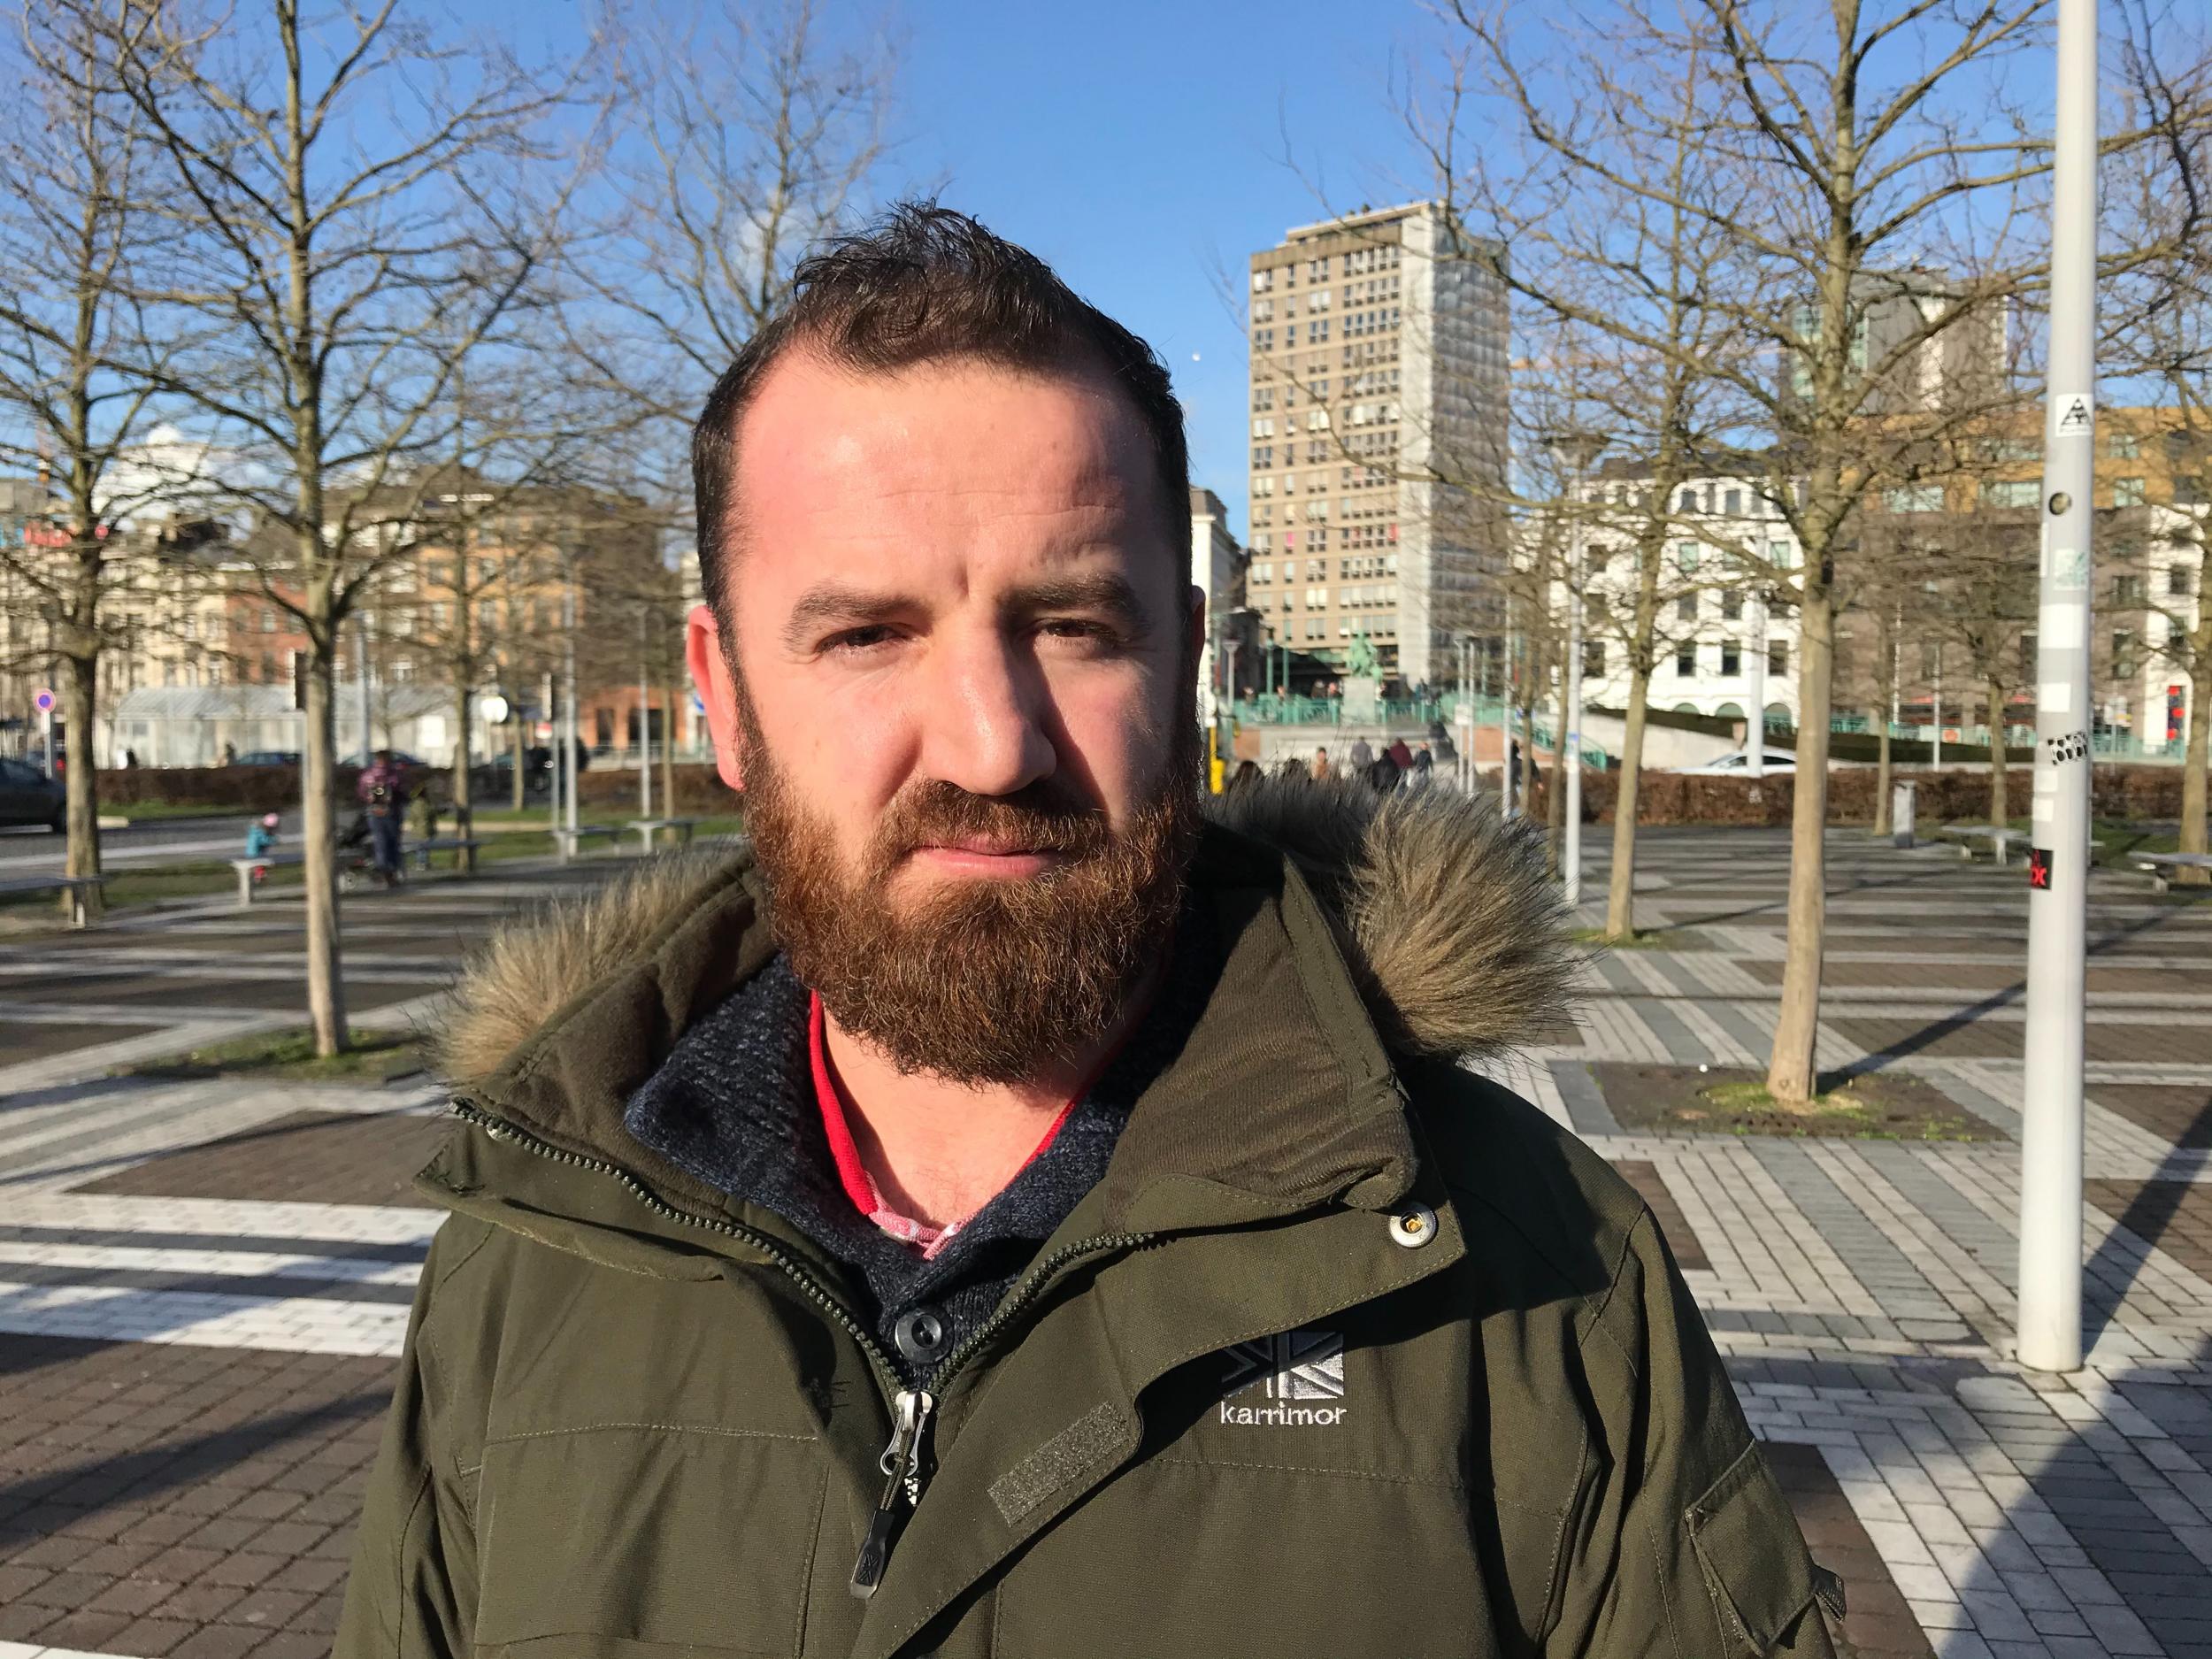 Mr Lala is currently sleeping rough in Brussels after being blocked from entering the UK